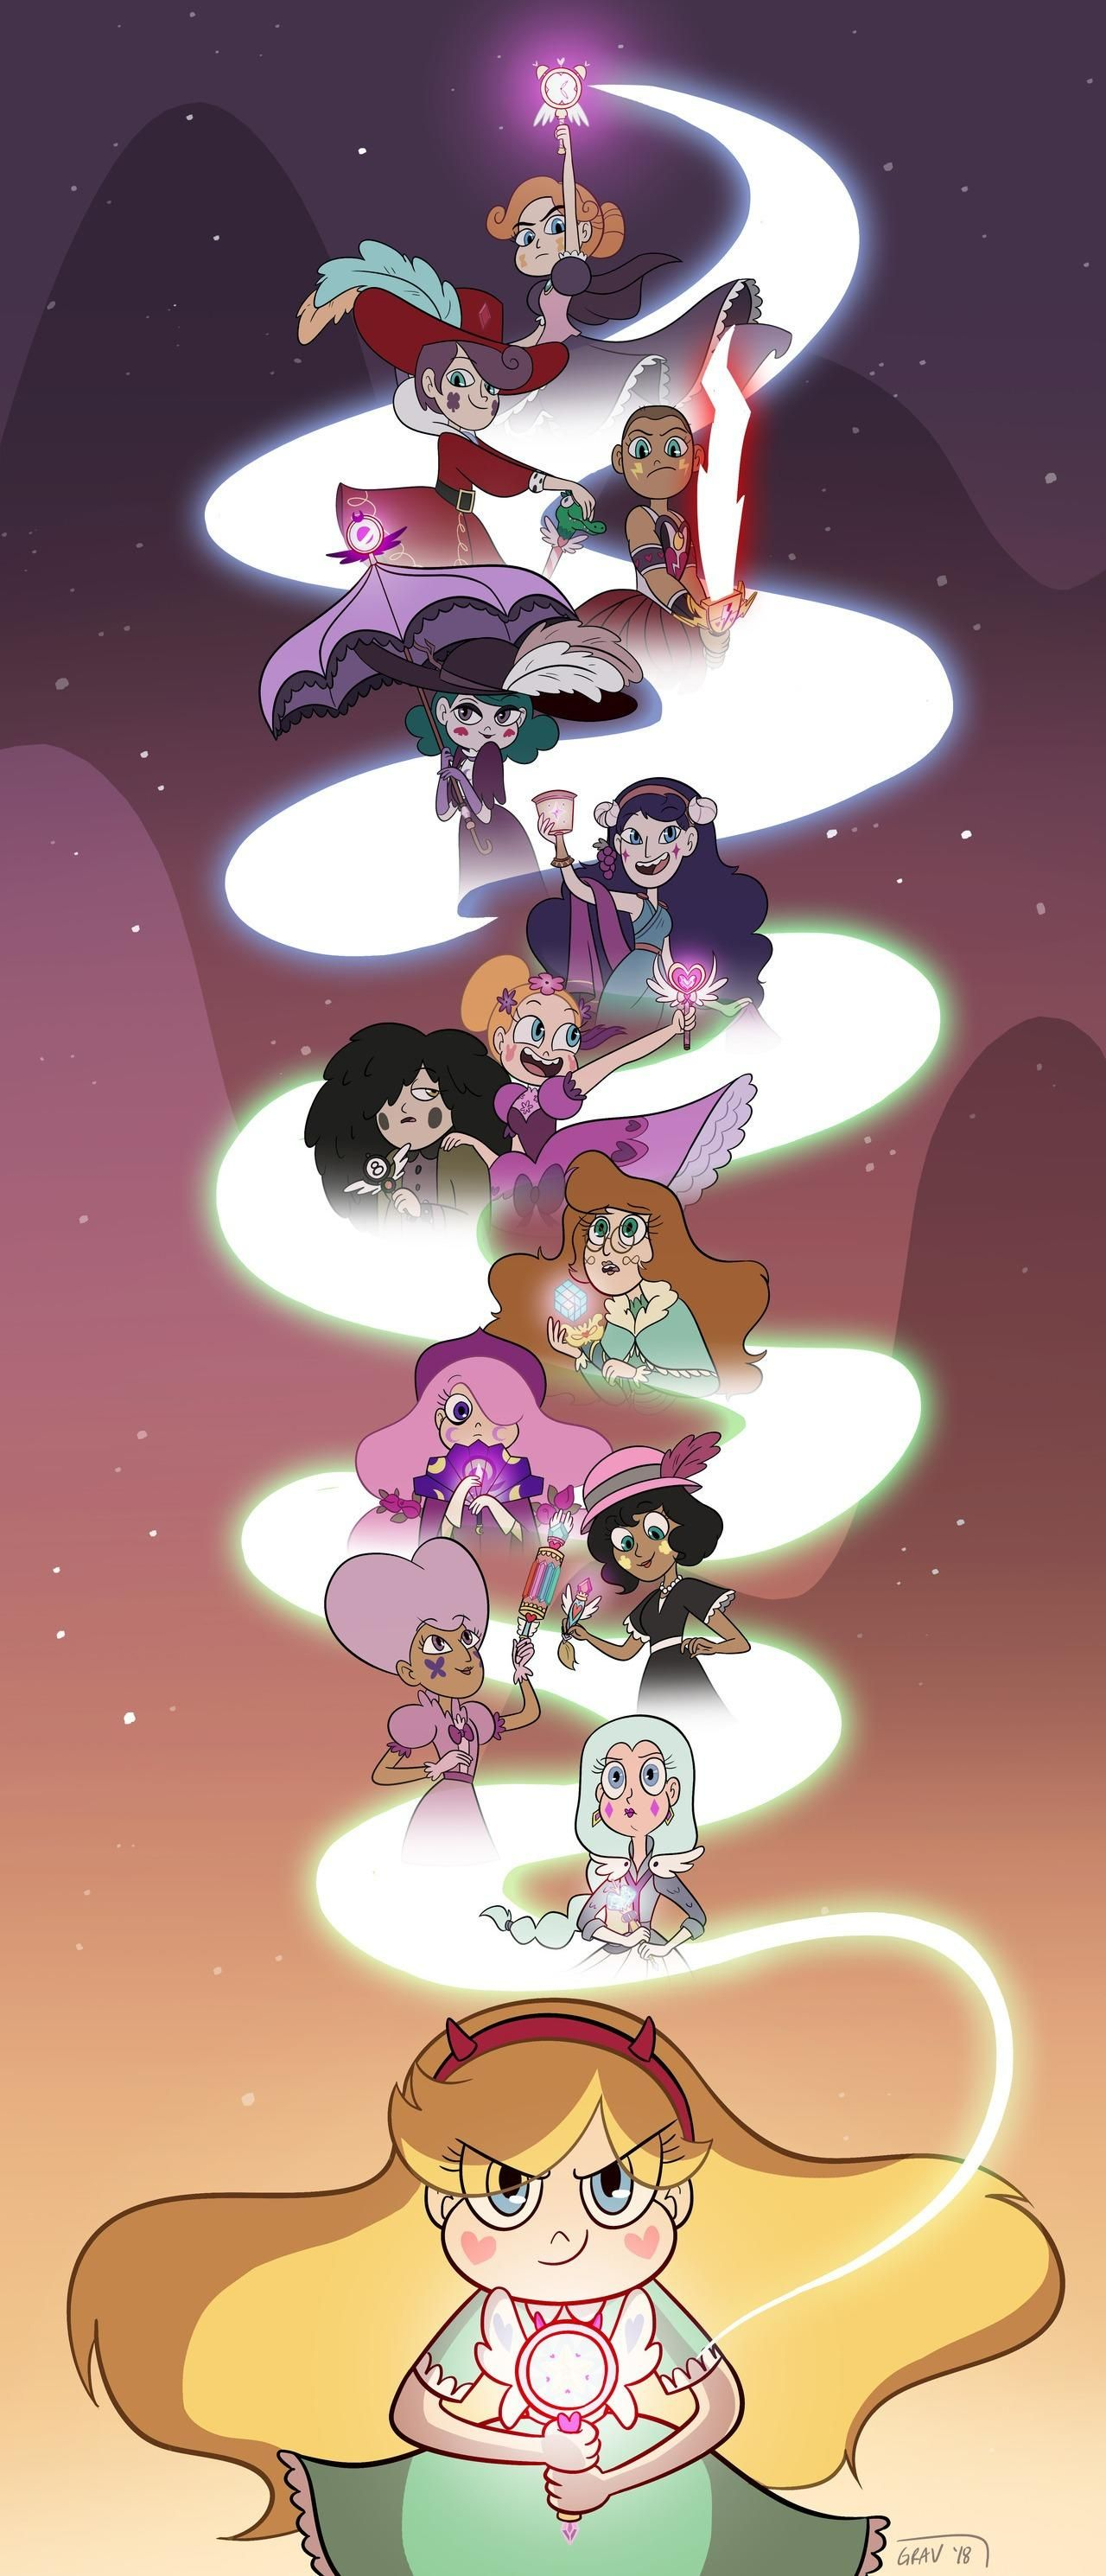 1280x2980 You are our legacy | Star vs. the Forces of Evil | Wallpapers bonitos, Imagens disney, For&Atilde;&sect;a